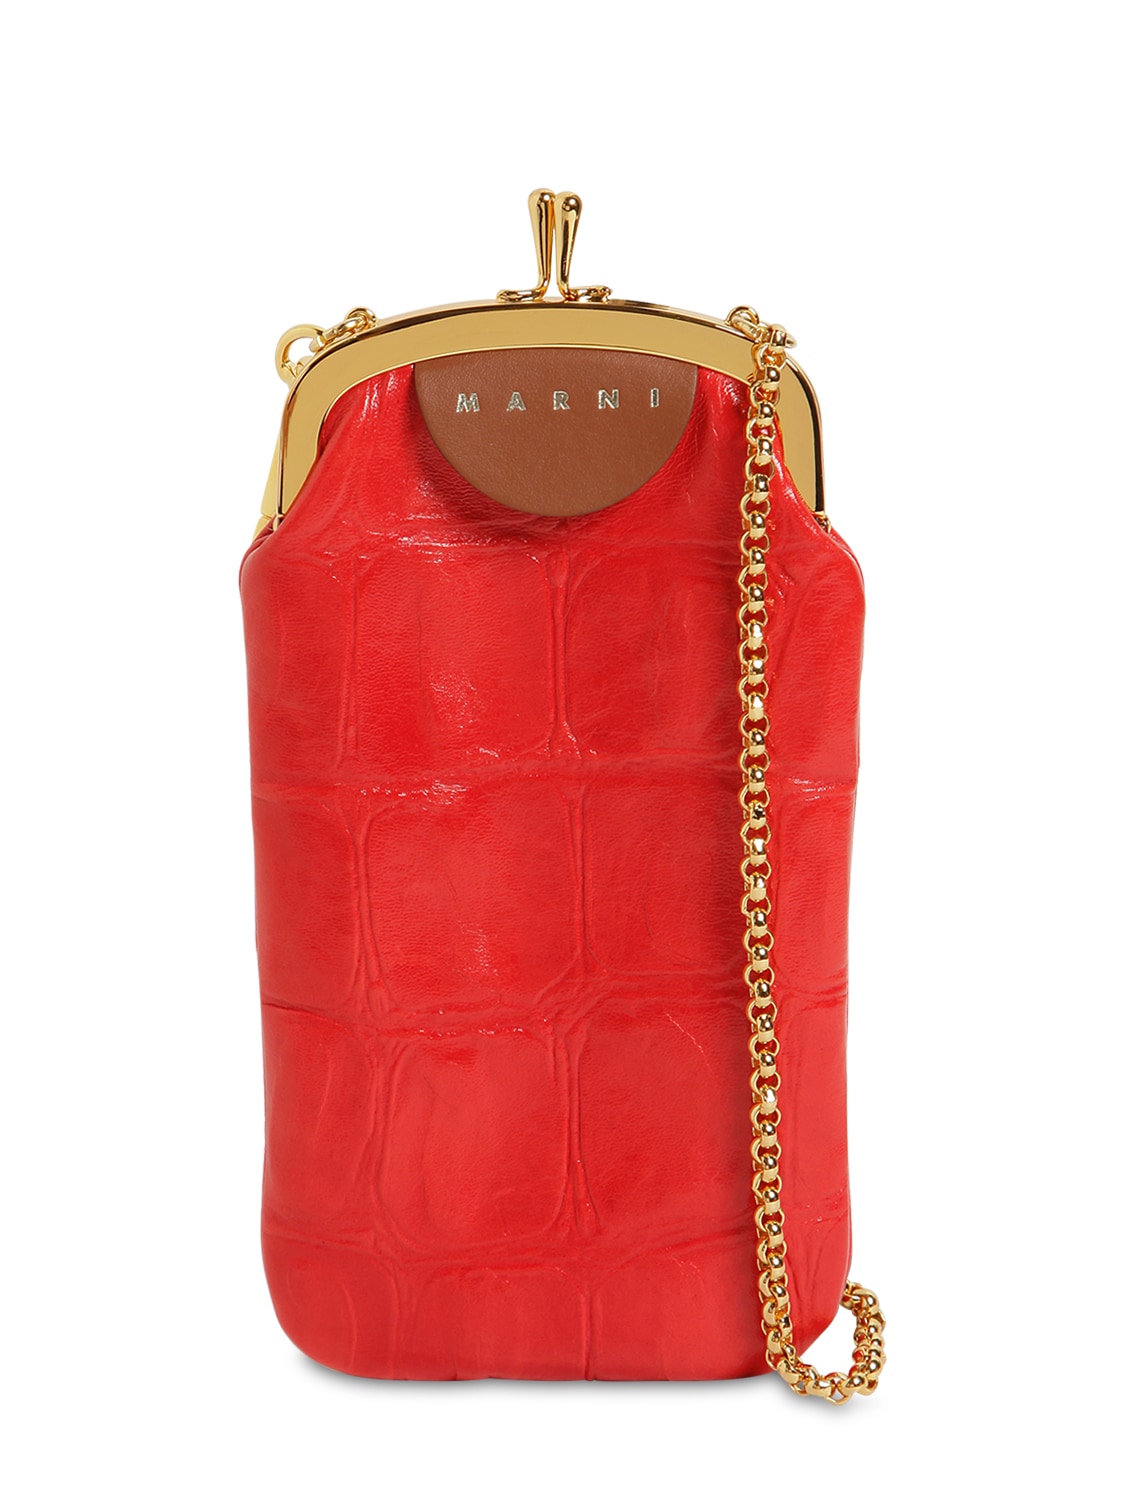 Marni Croc Embossed Leather Phone Case In Orange Red